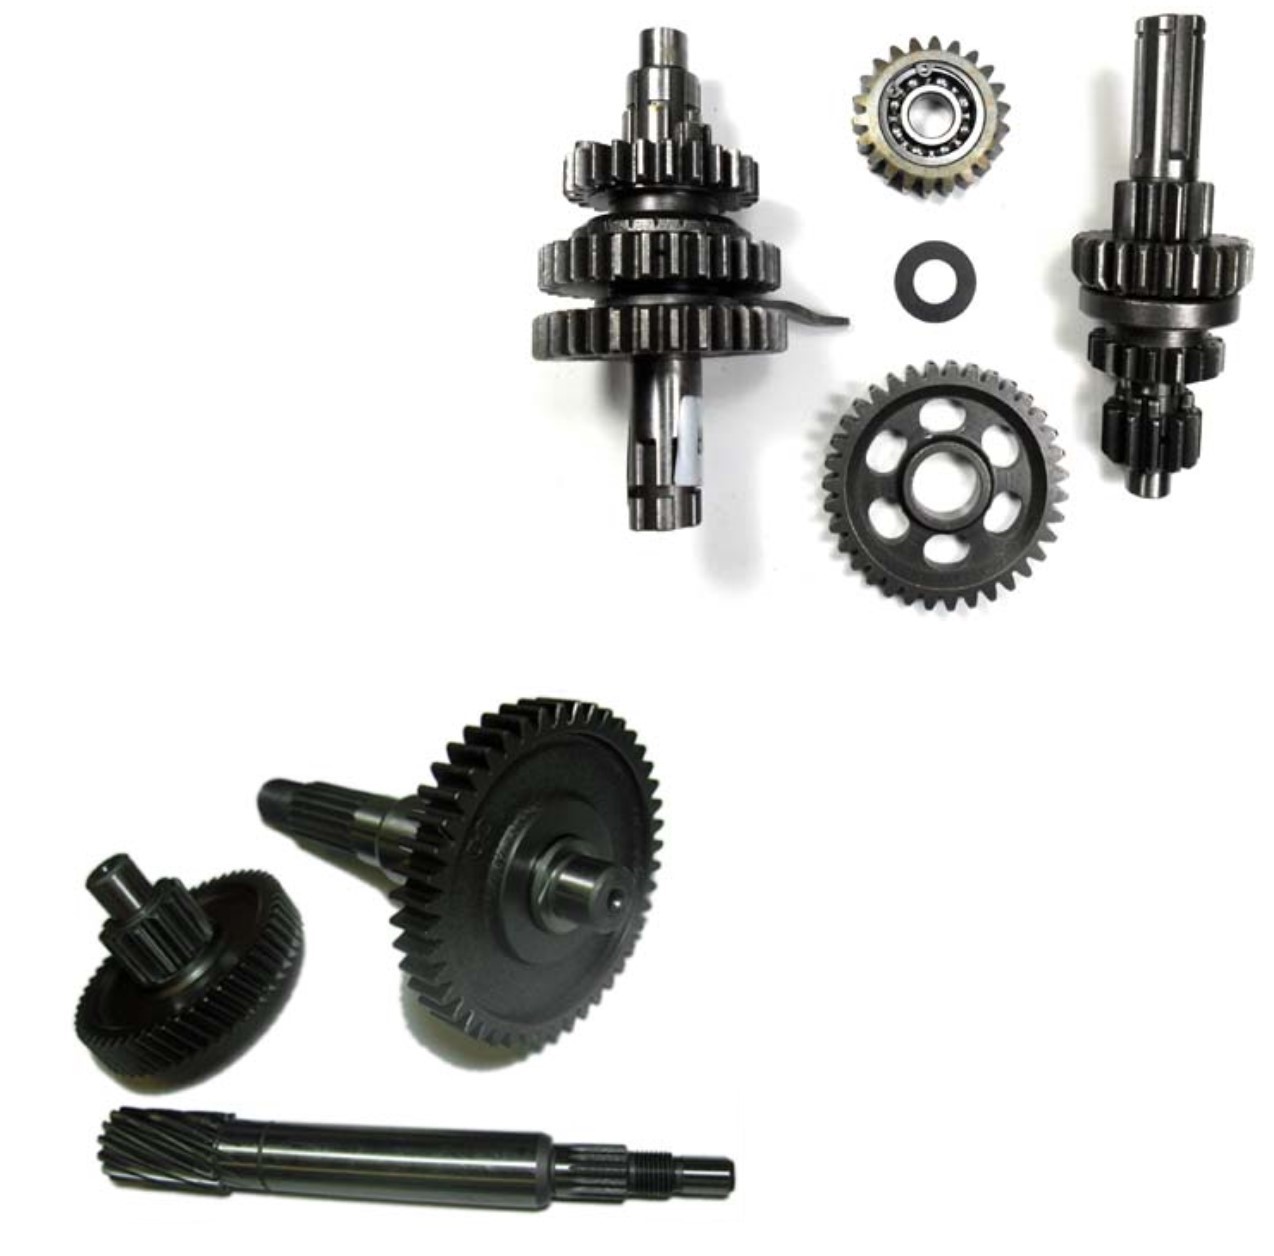 Gears and Gear Sets